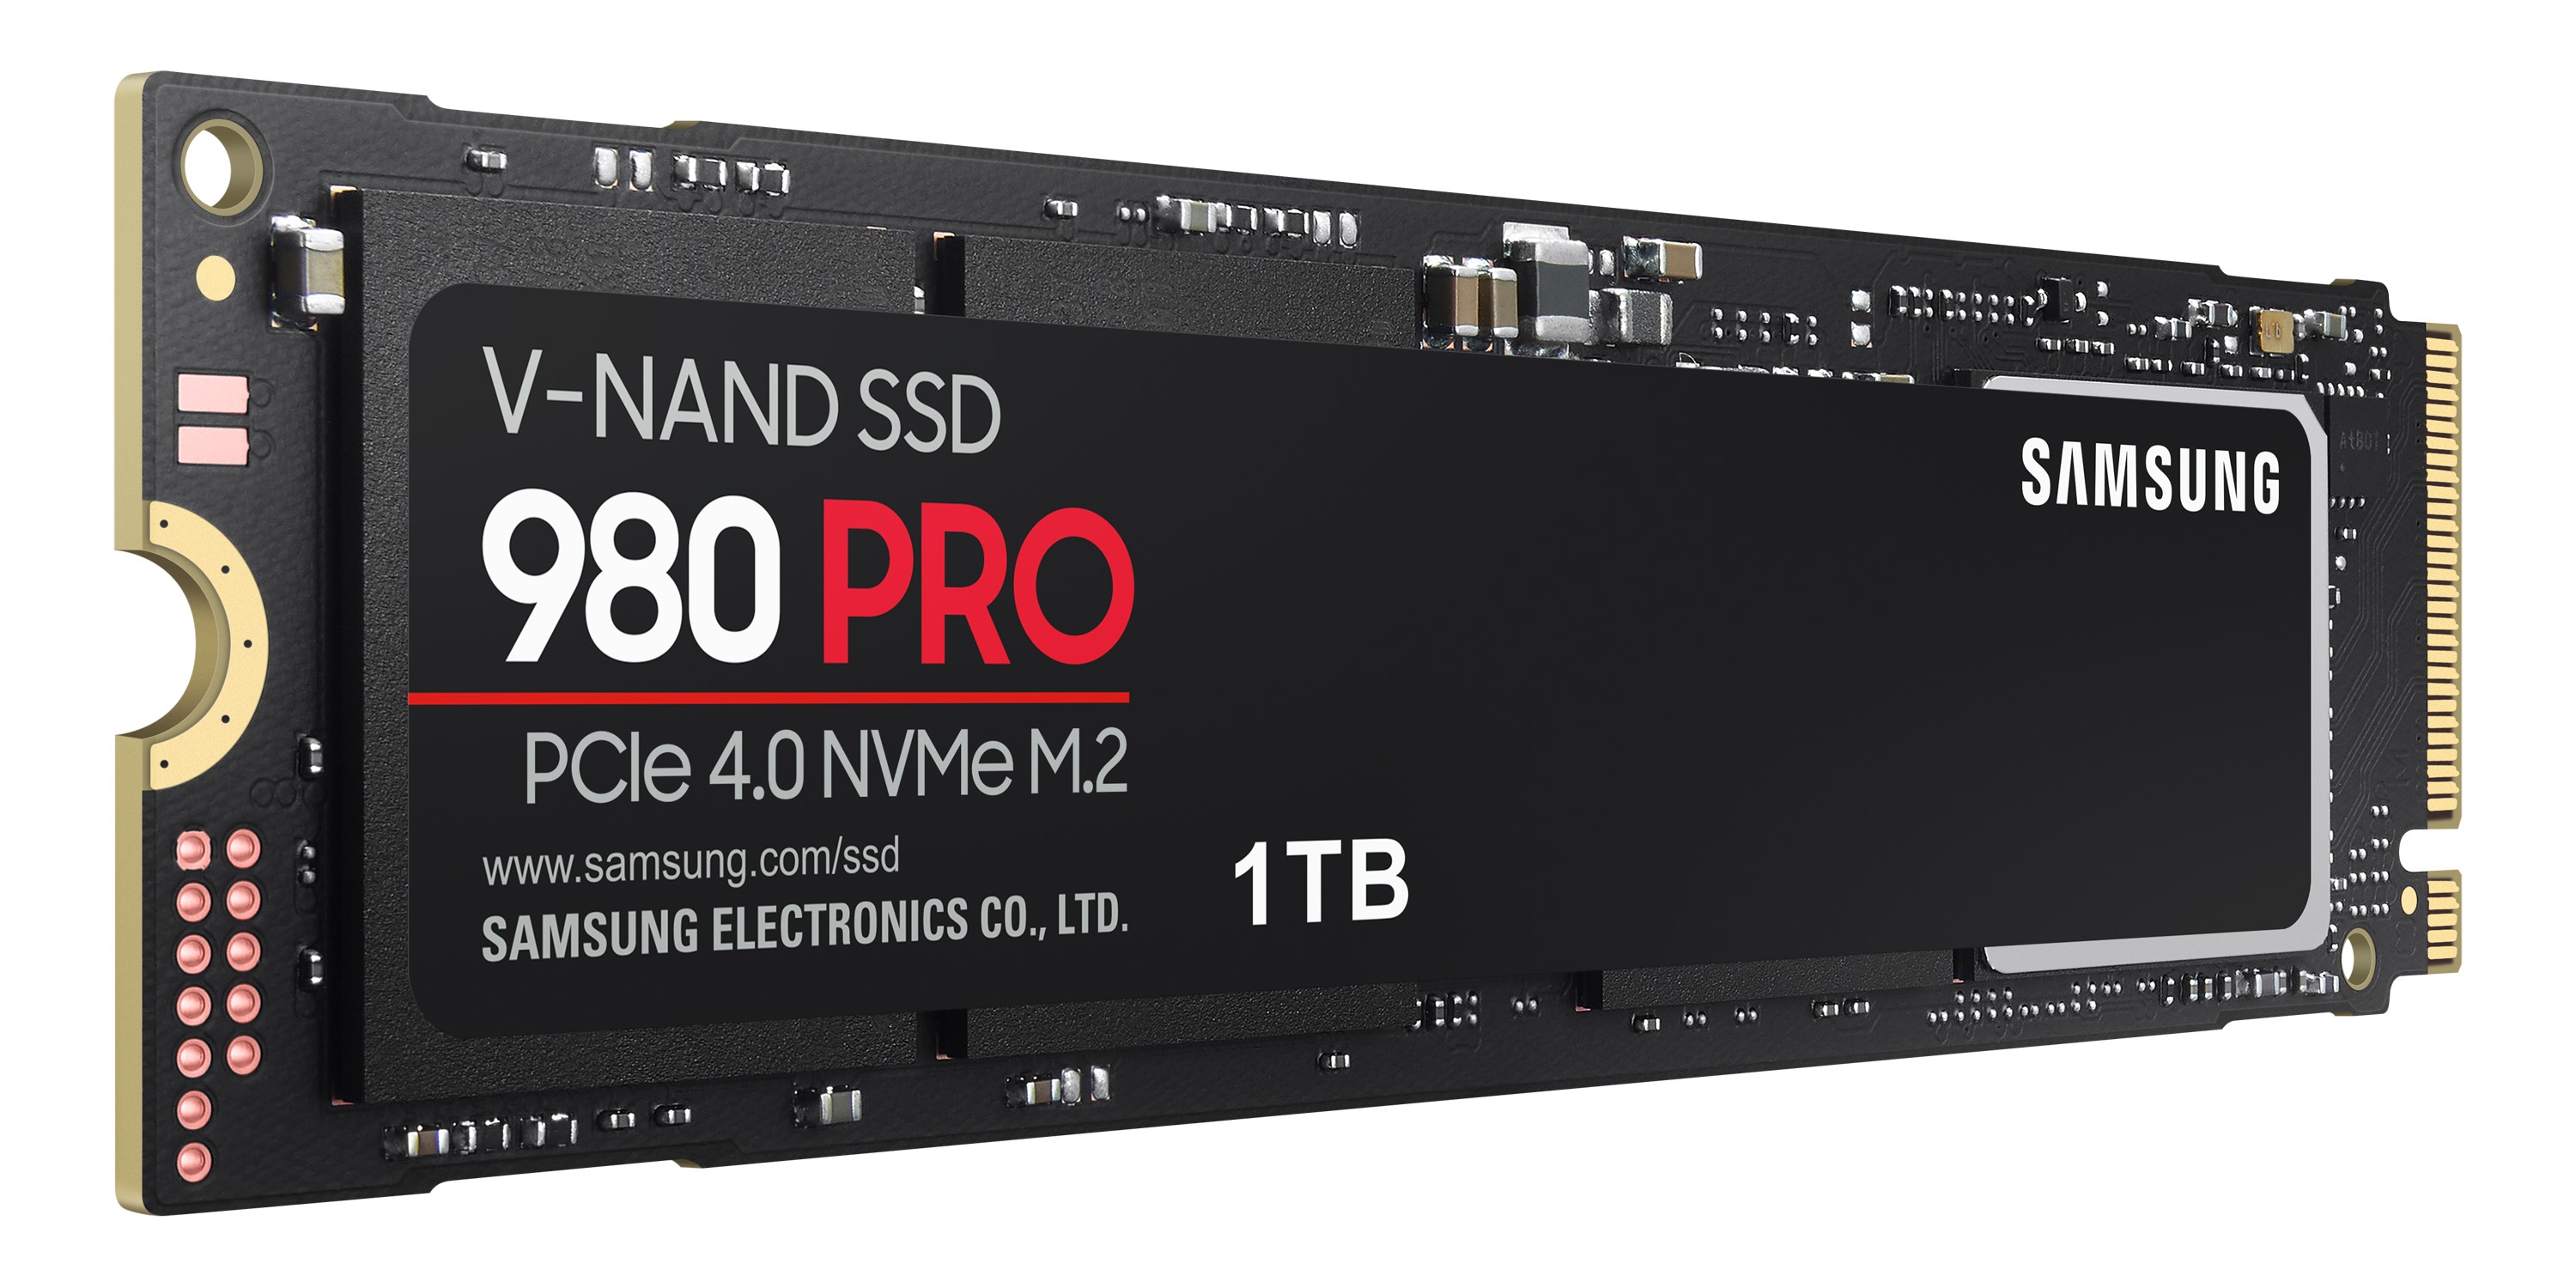 Samsung launches the 980 PRO SSD globally - NotebookCheck.net News